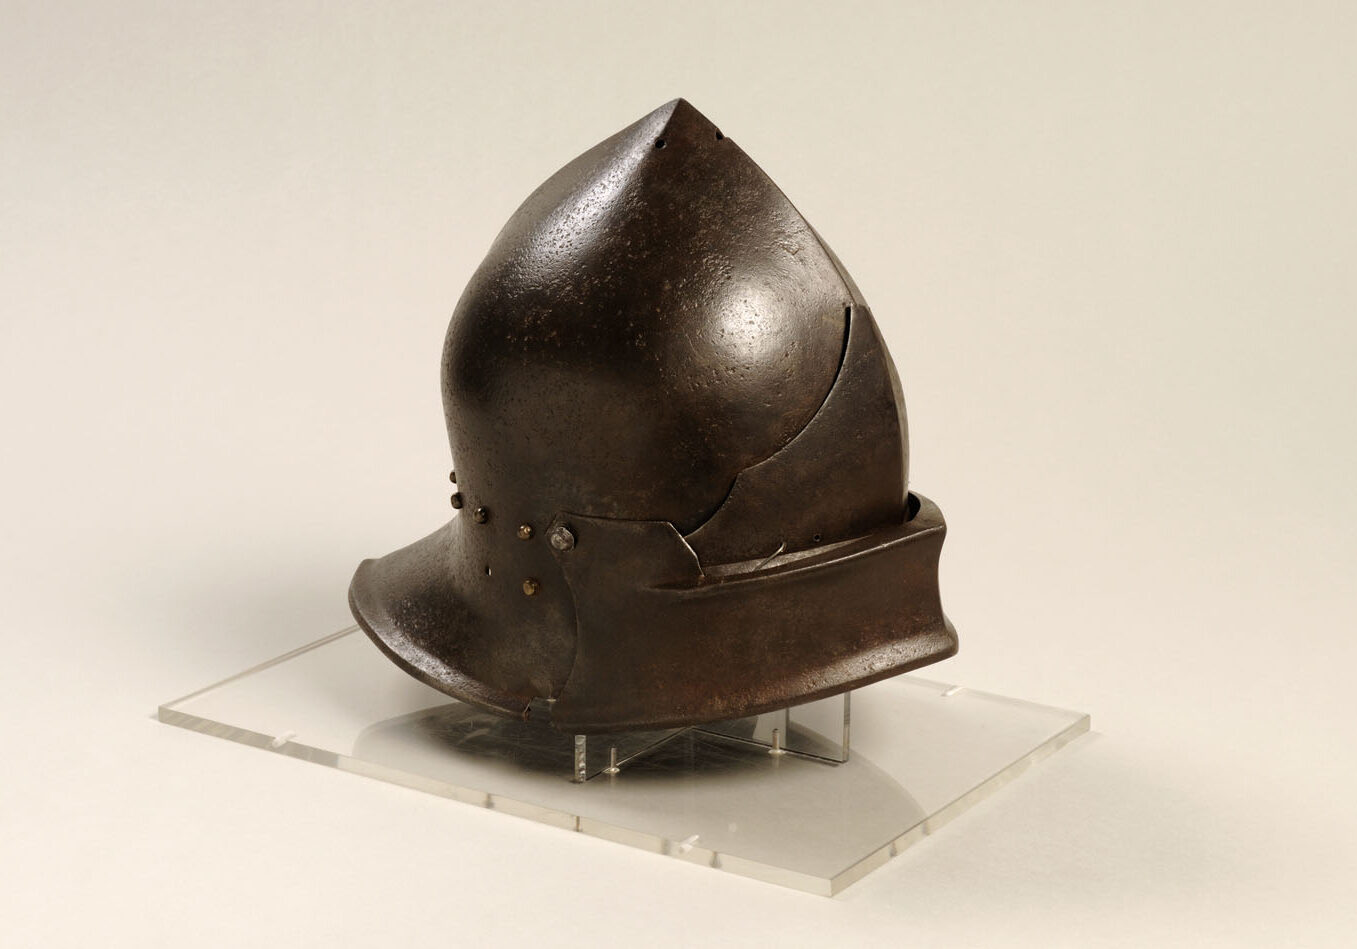 A sallet made during the Wars of the Roses c. 1460 by Martin Rondele of Bruges and kept at St Mary’s Guildhall